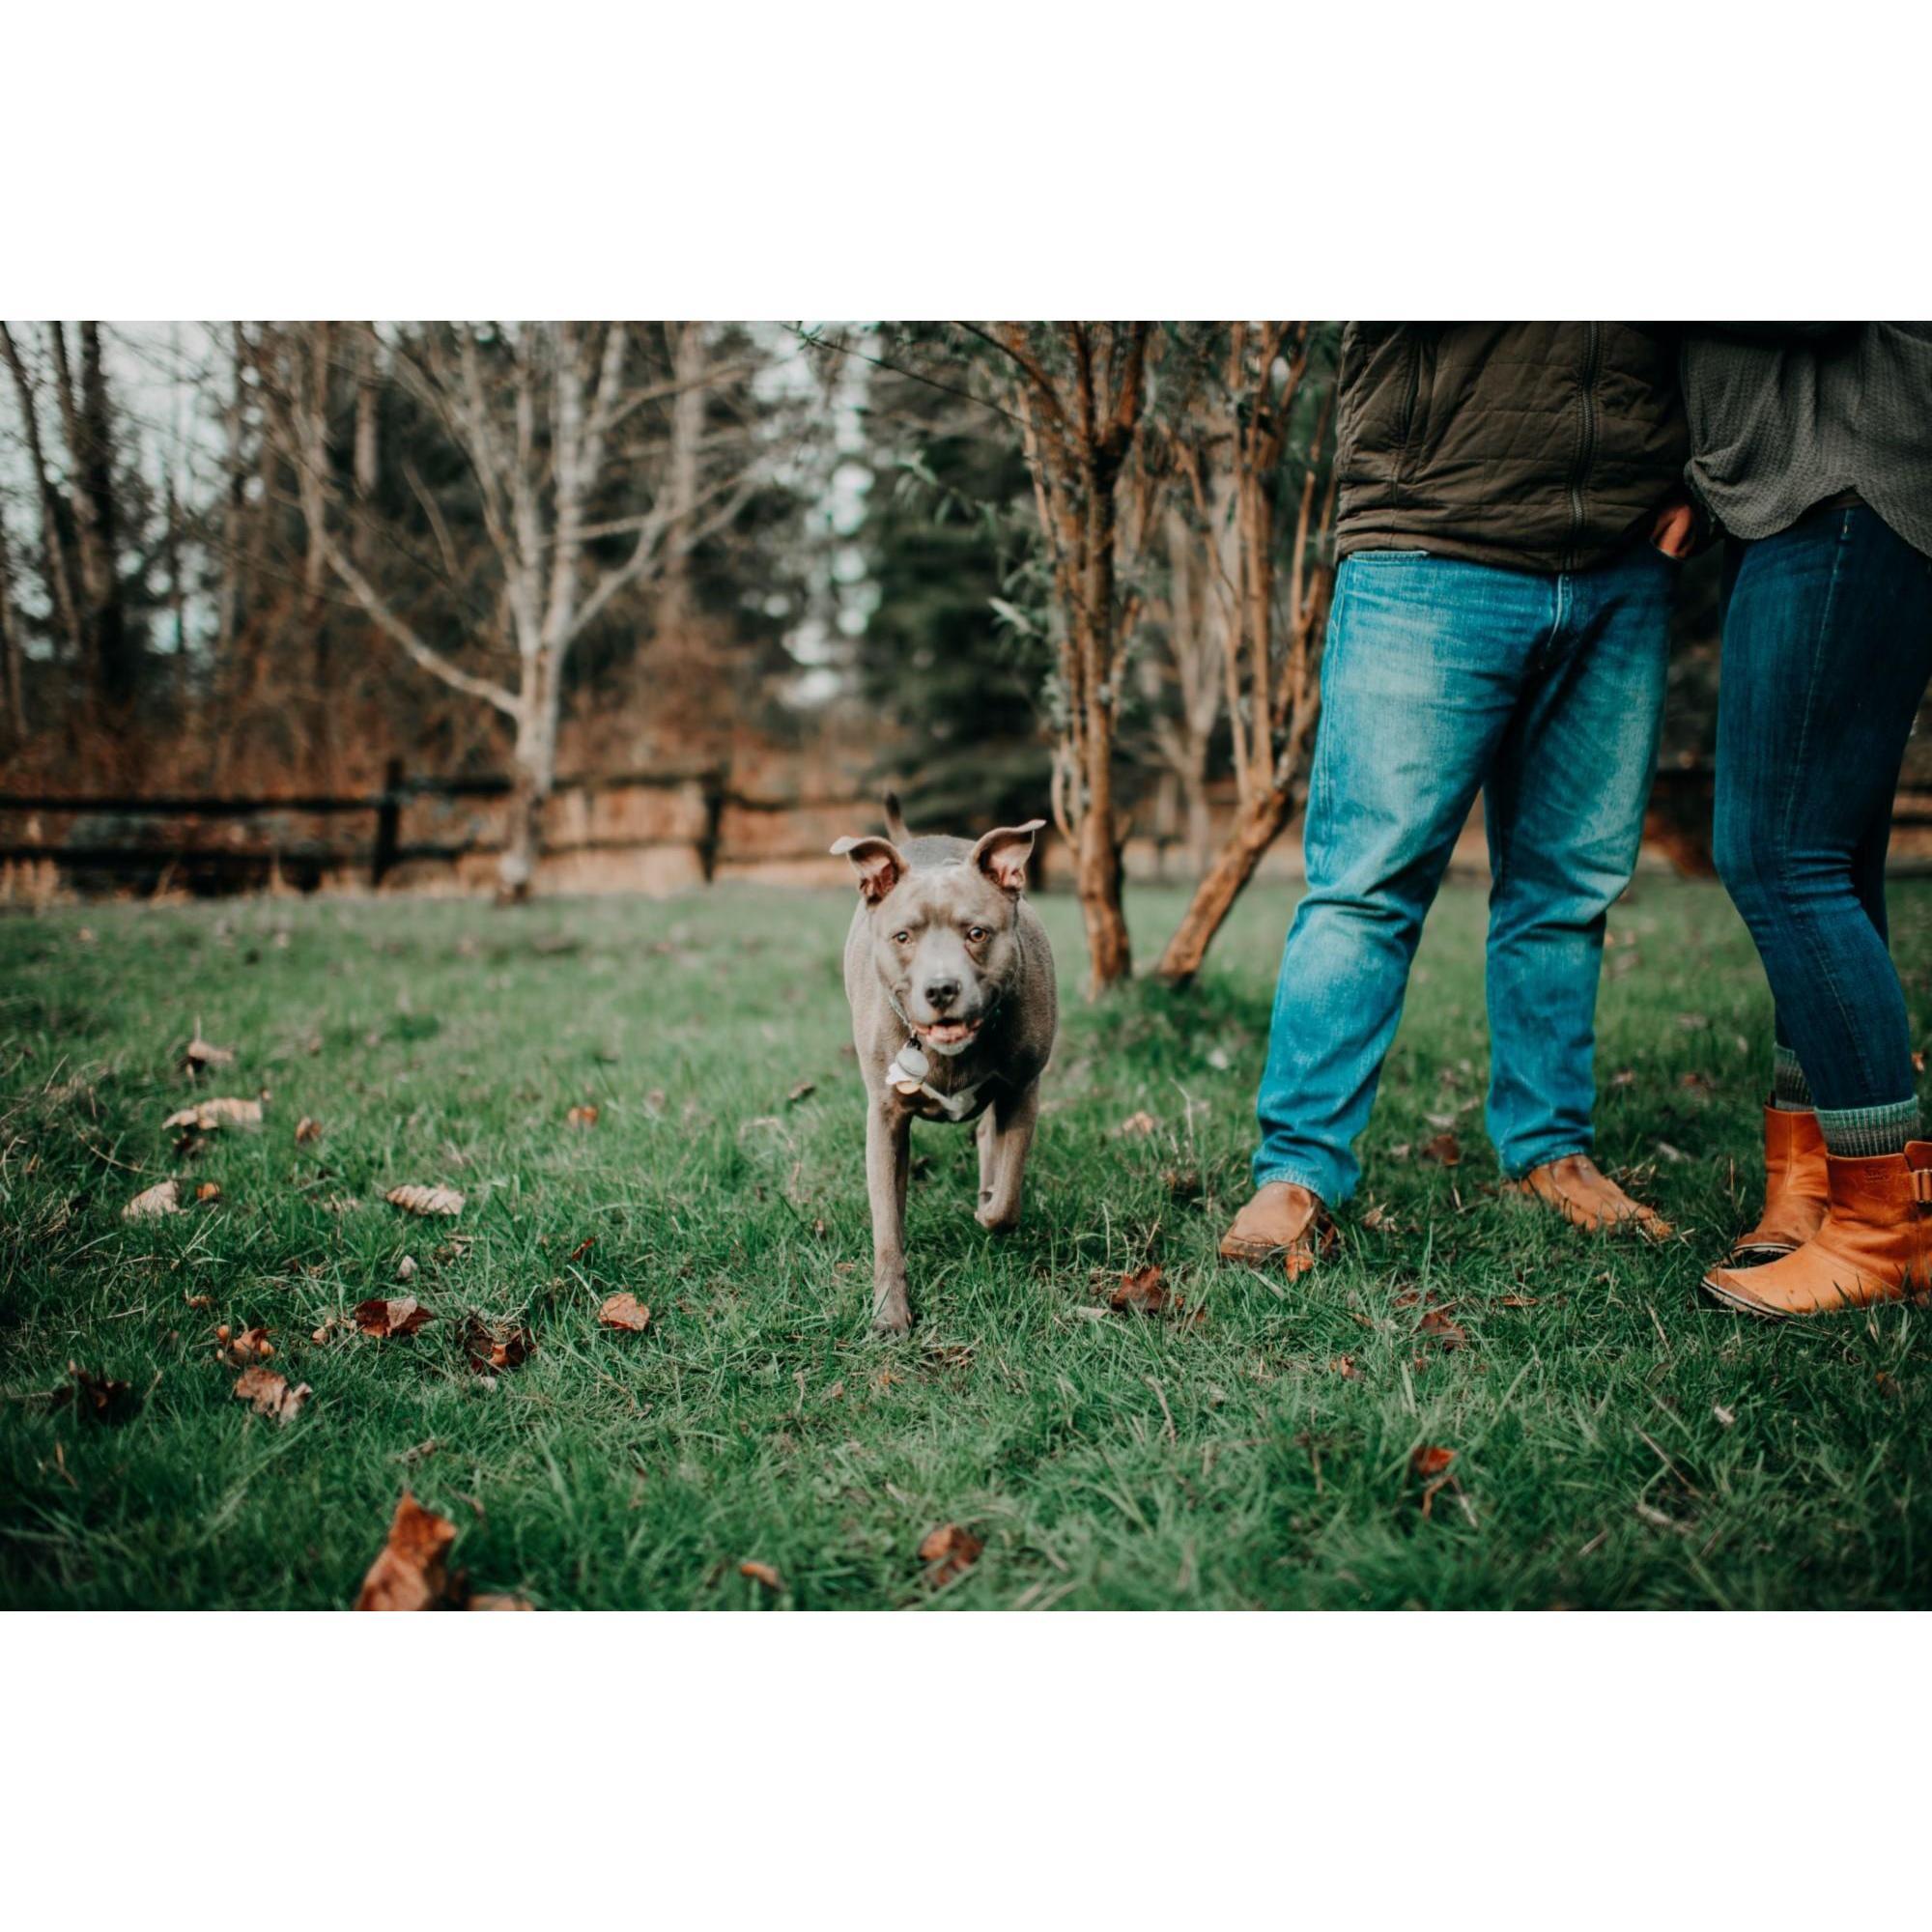 Engagement Shoot at our house, with Baya - January 2020